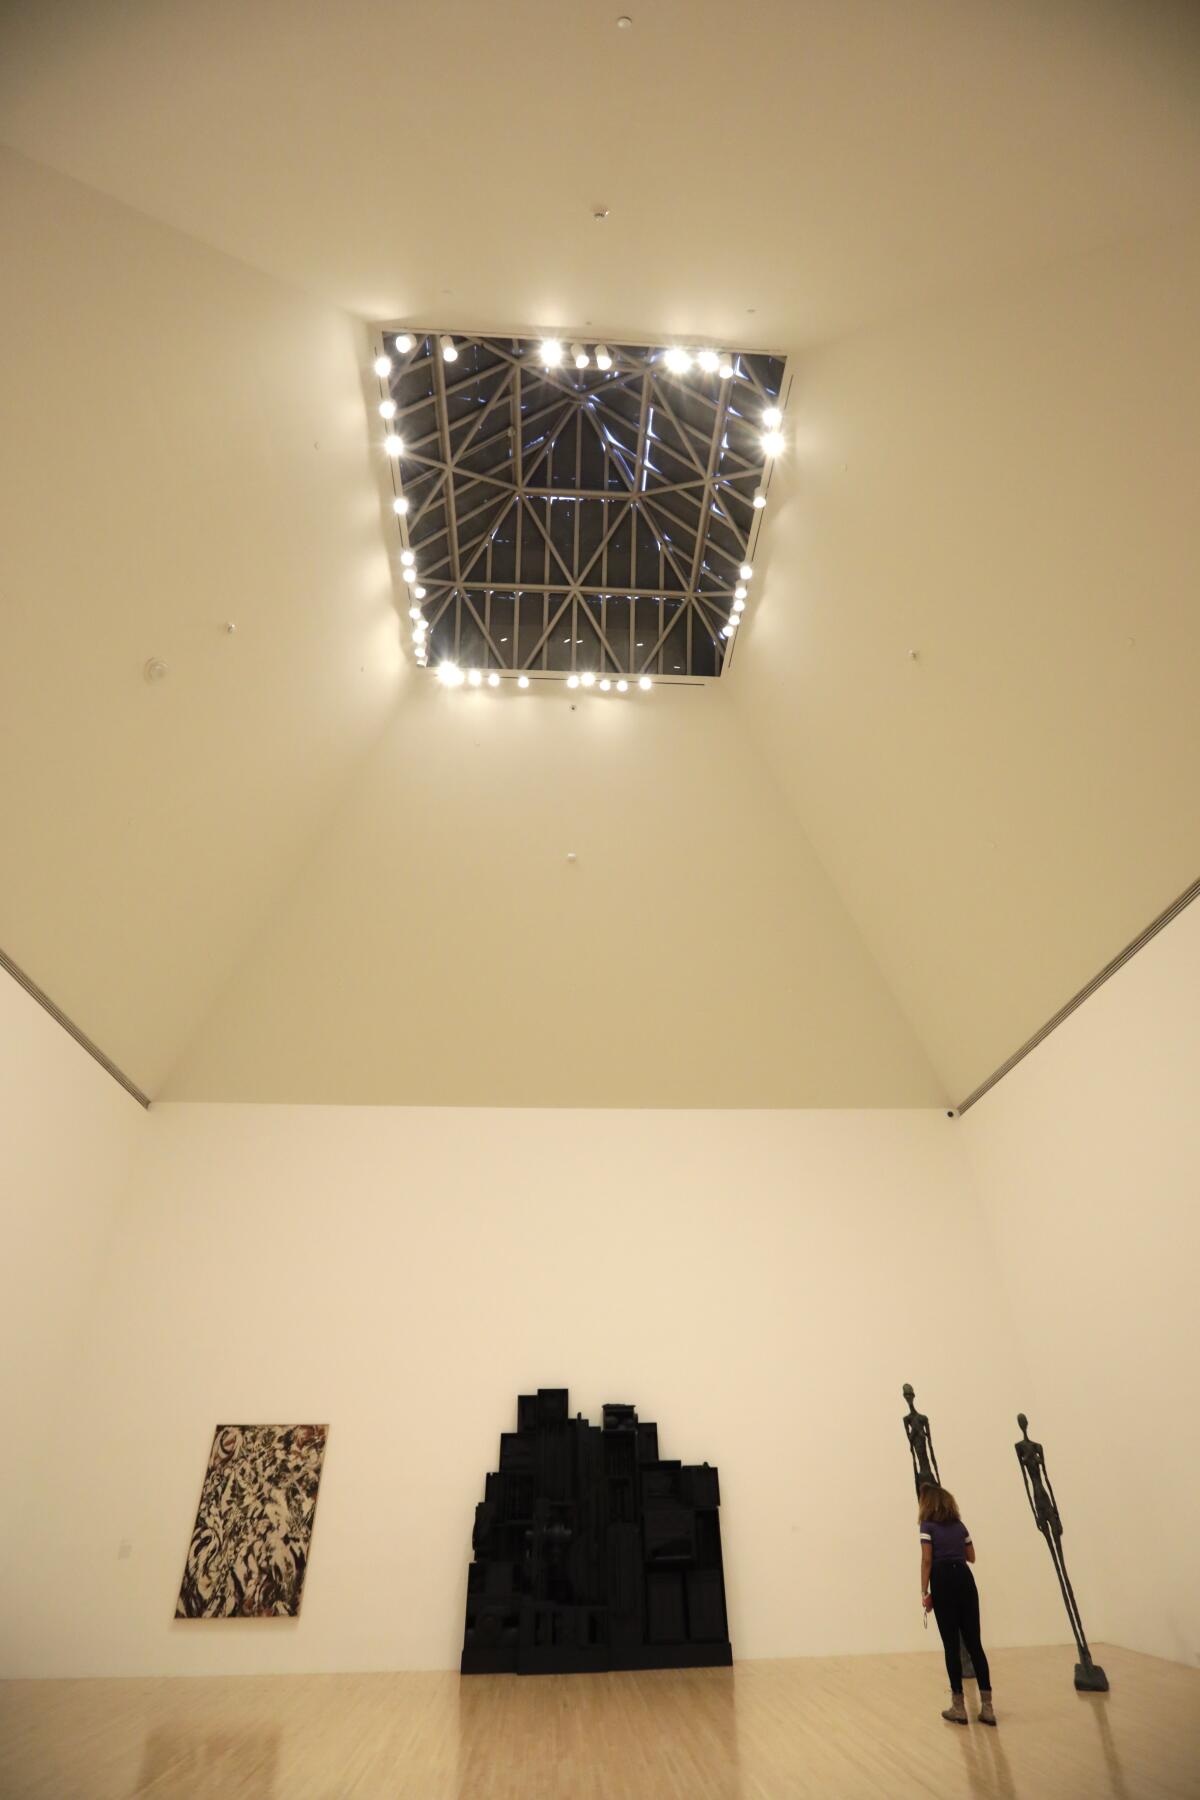 A gallery with very tall ceilings contains a skylight that has been covered up and replaced by artificial illumination.